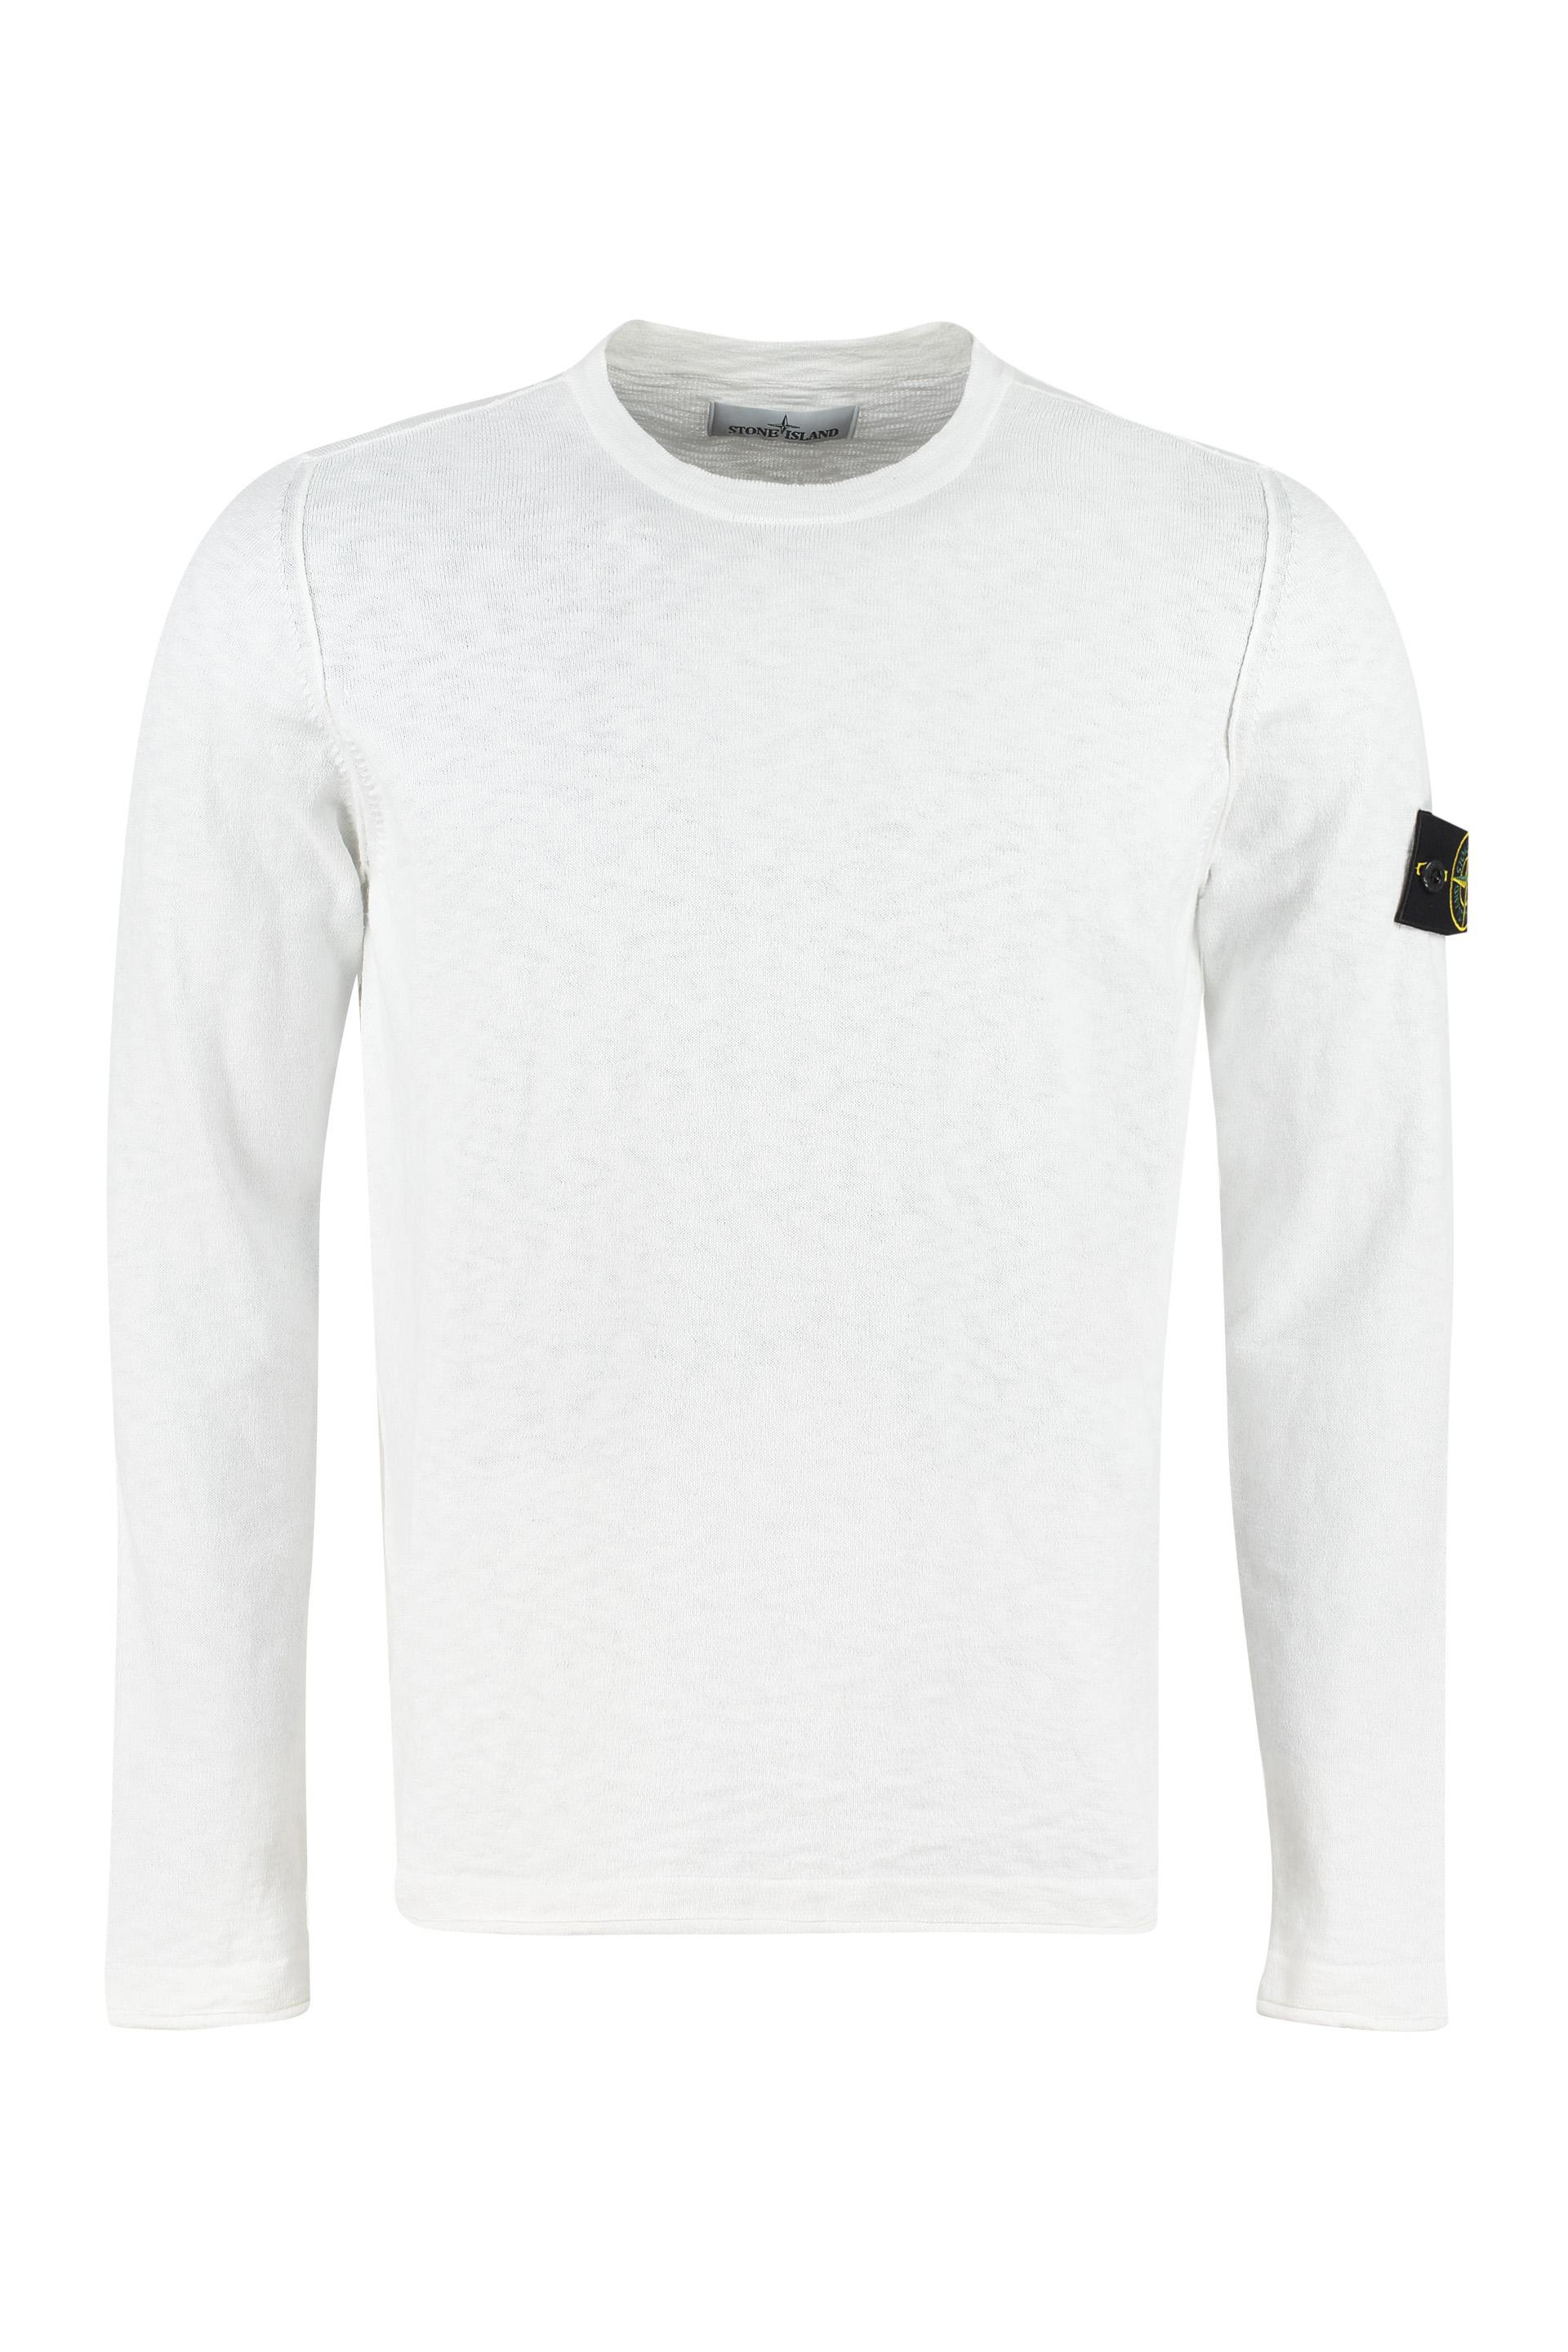 Stone Island Cotton Blend Crew-neck Sweater in White for Men - Lyst